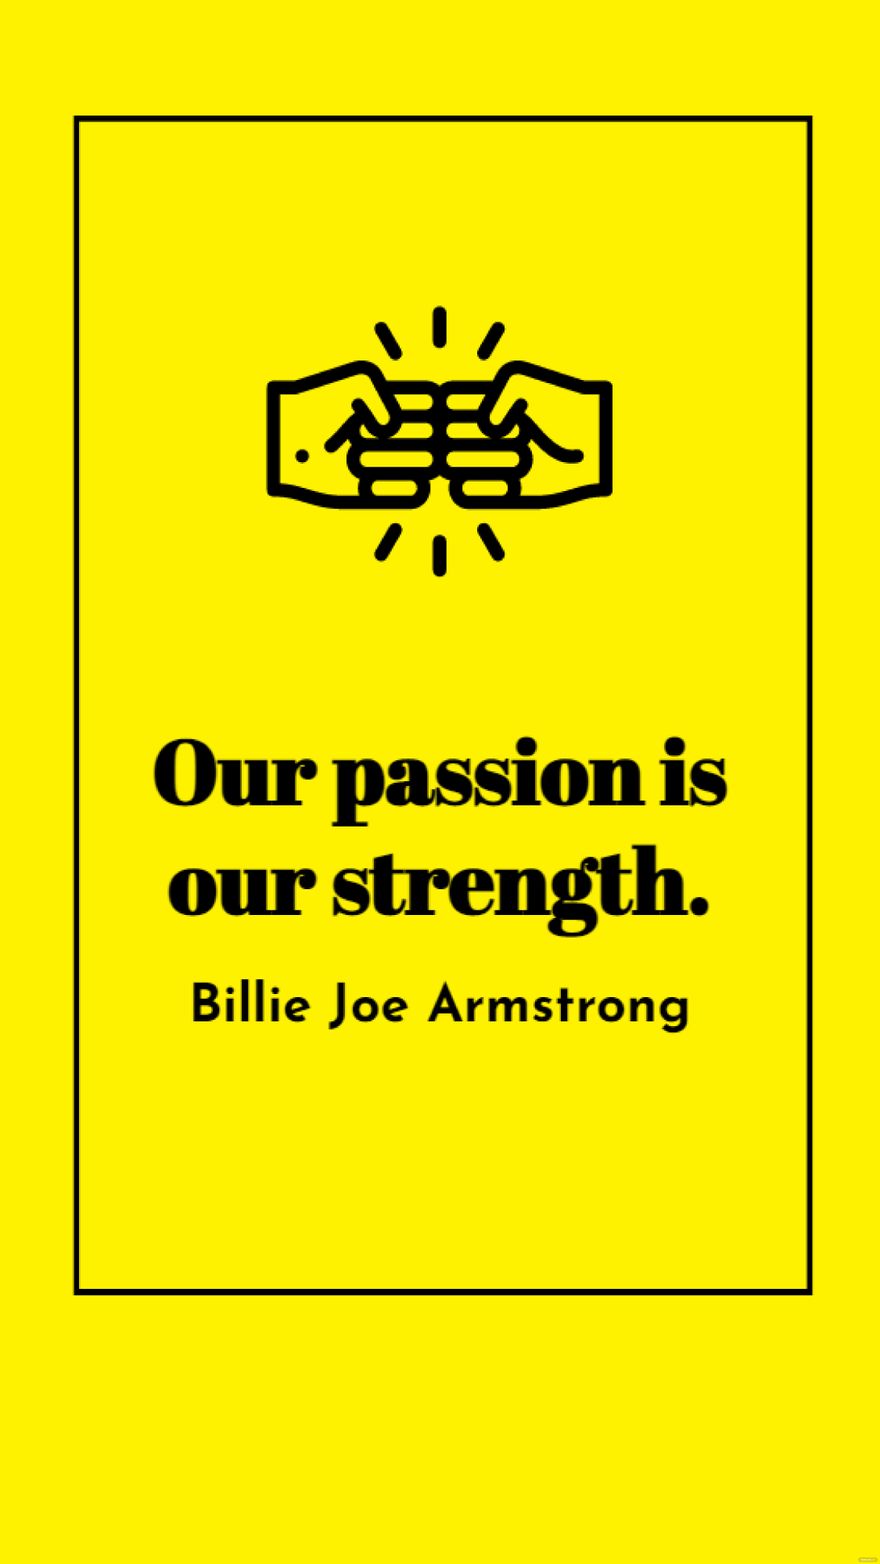 Billie Joe Armstrong - Our passion is our strength. in JPG